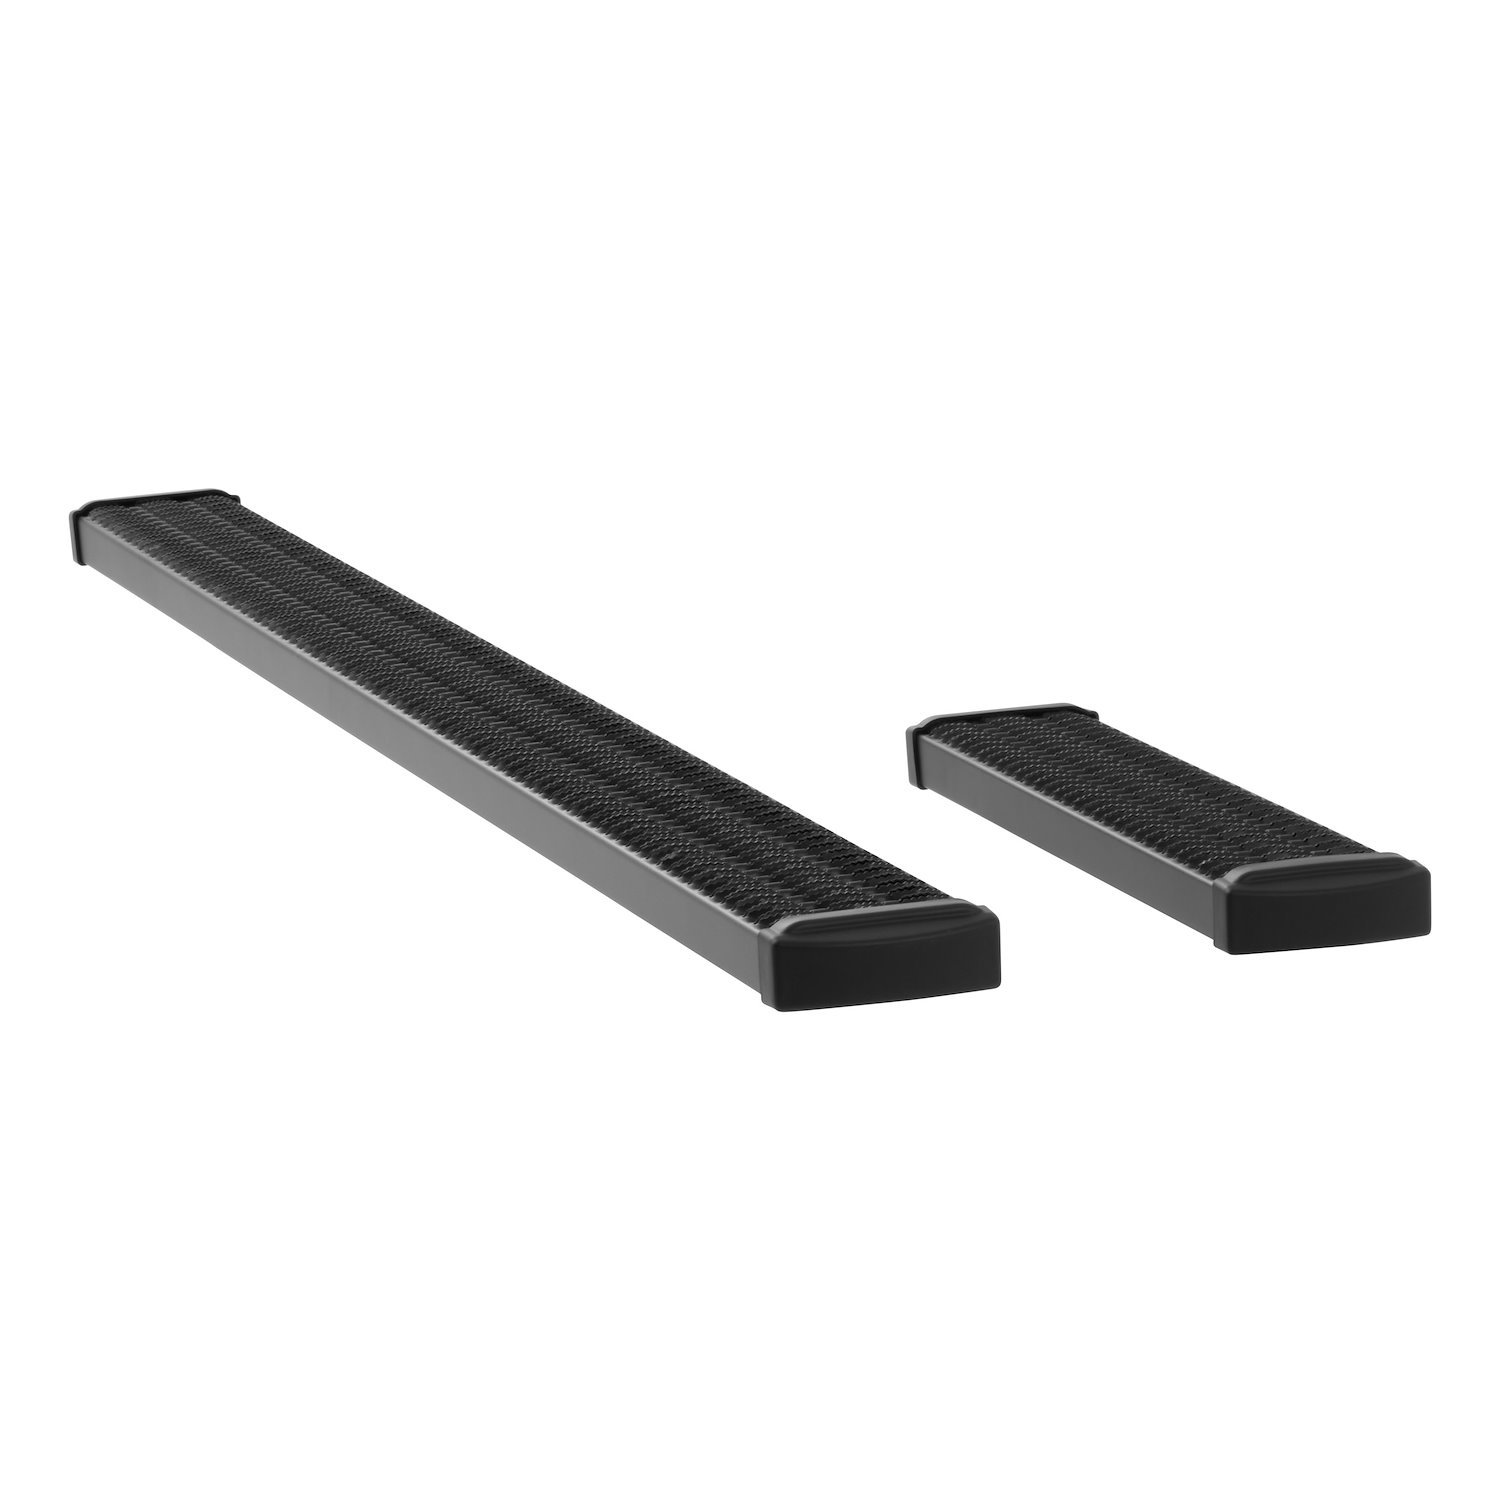 415100-570124 Grip Step 7 in. x 36 in., 100 in. Black Aluminum Running Boards Fits Select Ford E-Series